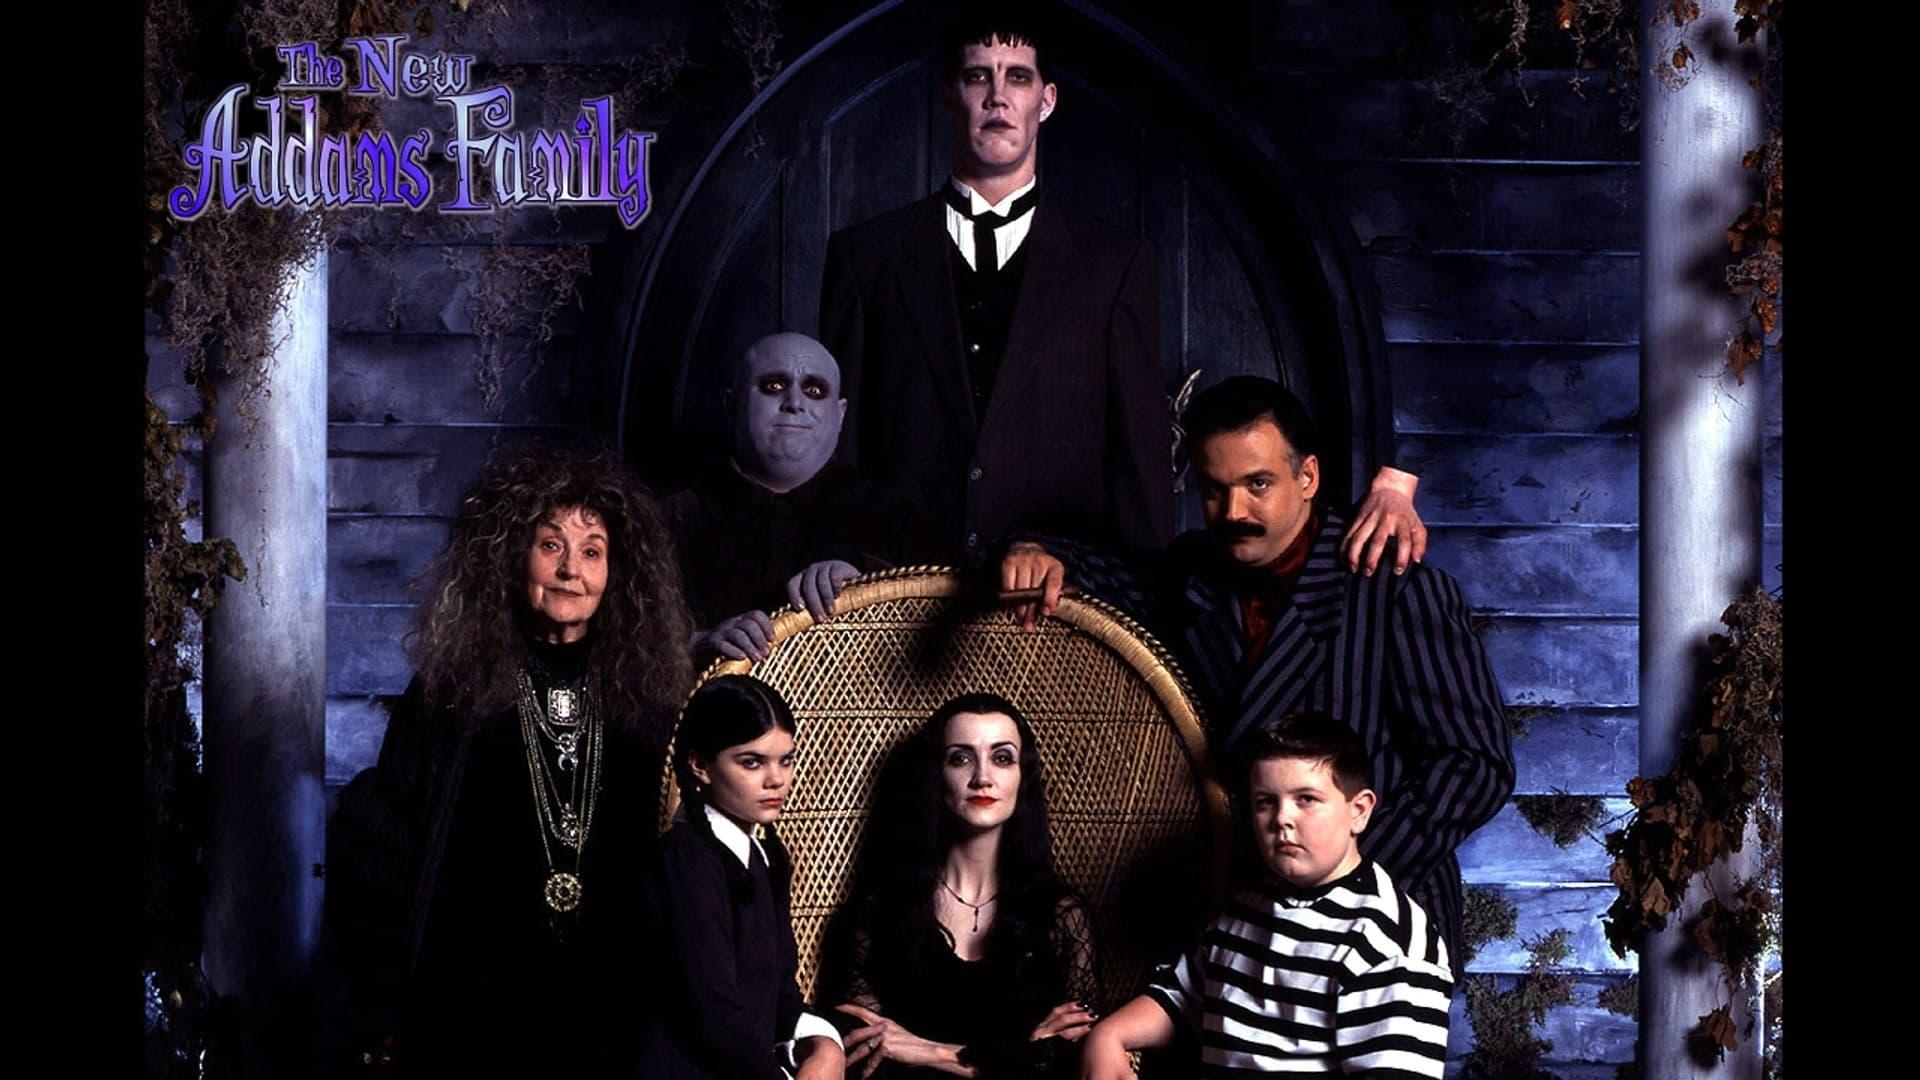 The New Addams Family backdrop